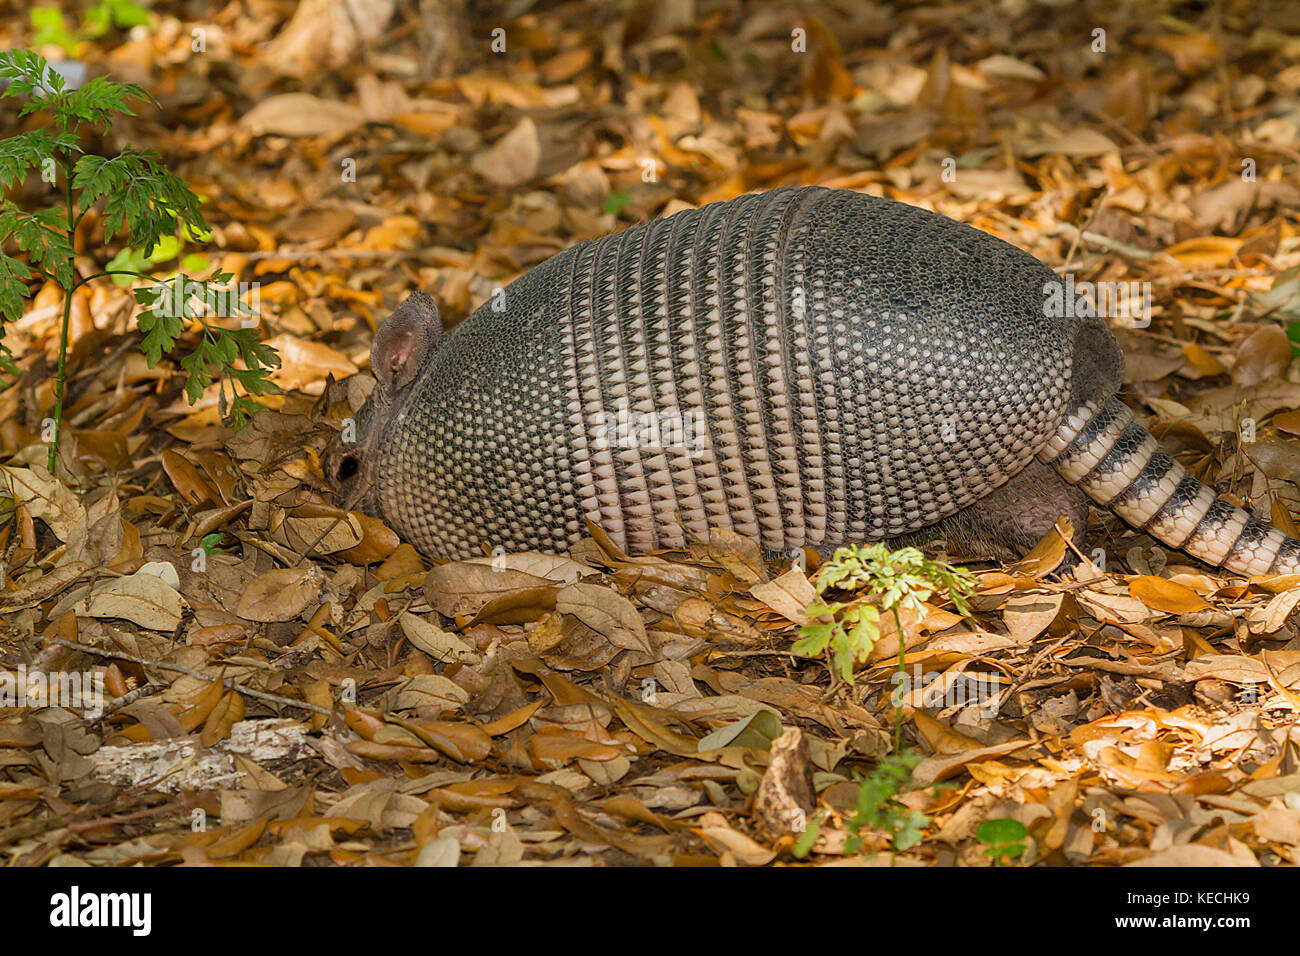 Nine-banded armadillo looking for food under leaves on the ground Stock Photo